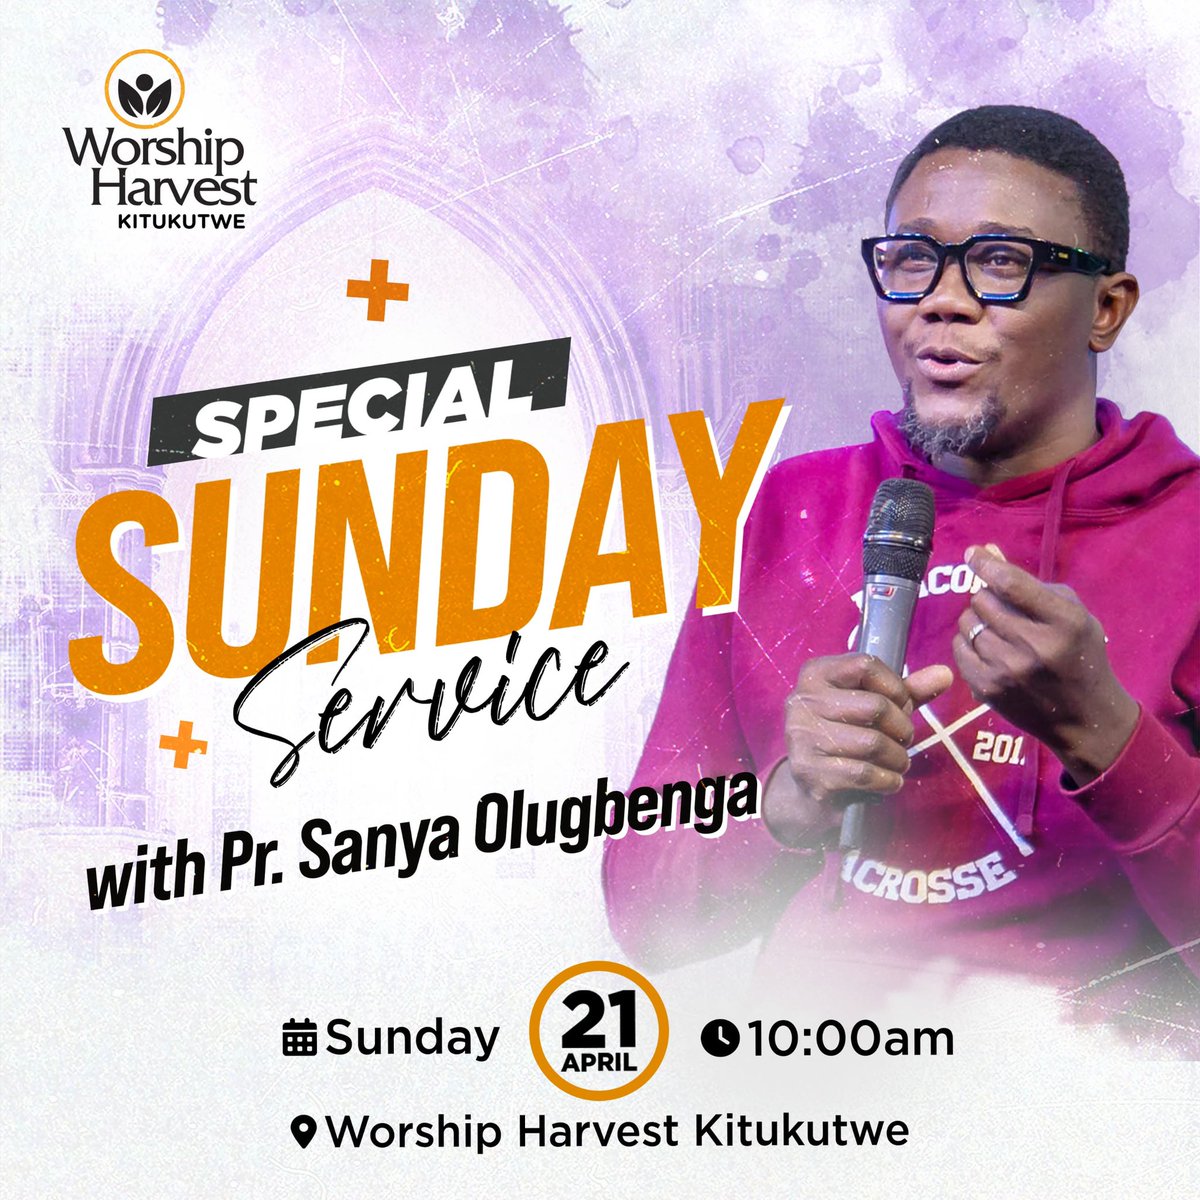 We have the pleasure of hosting Pr Sanya Olubenga at @worship_harvest Kitukutwe this morning at the 10am service. You are welcome to join us